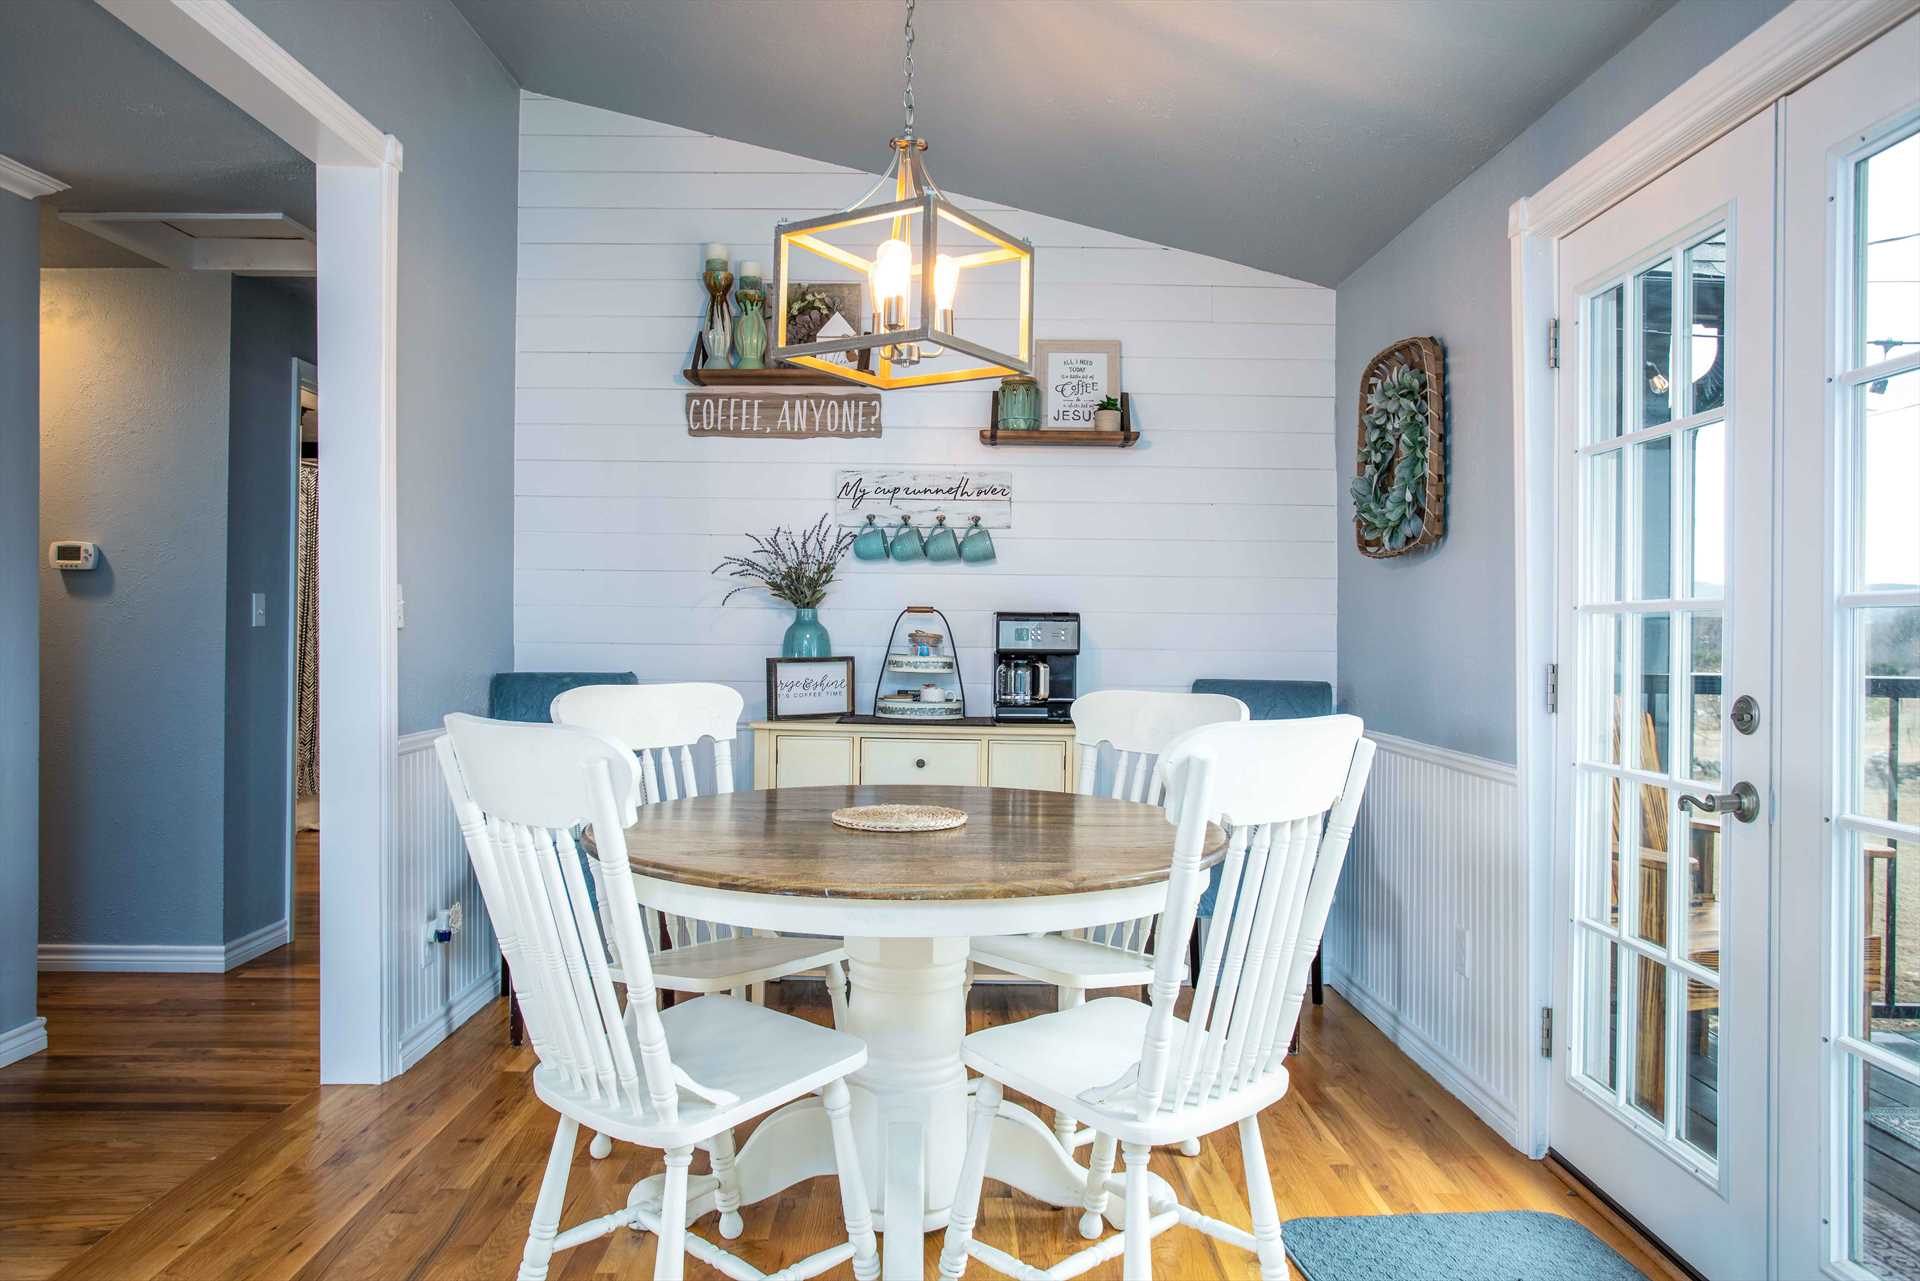                                                 Check out this charming breakfast nook, flooded with warm natural light through French doors!